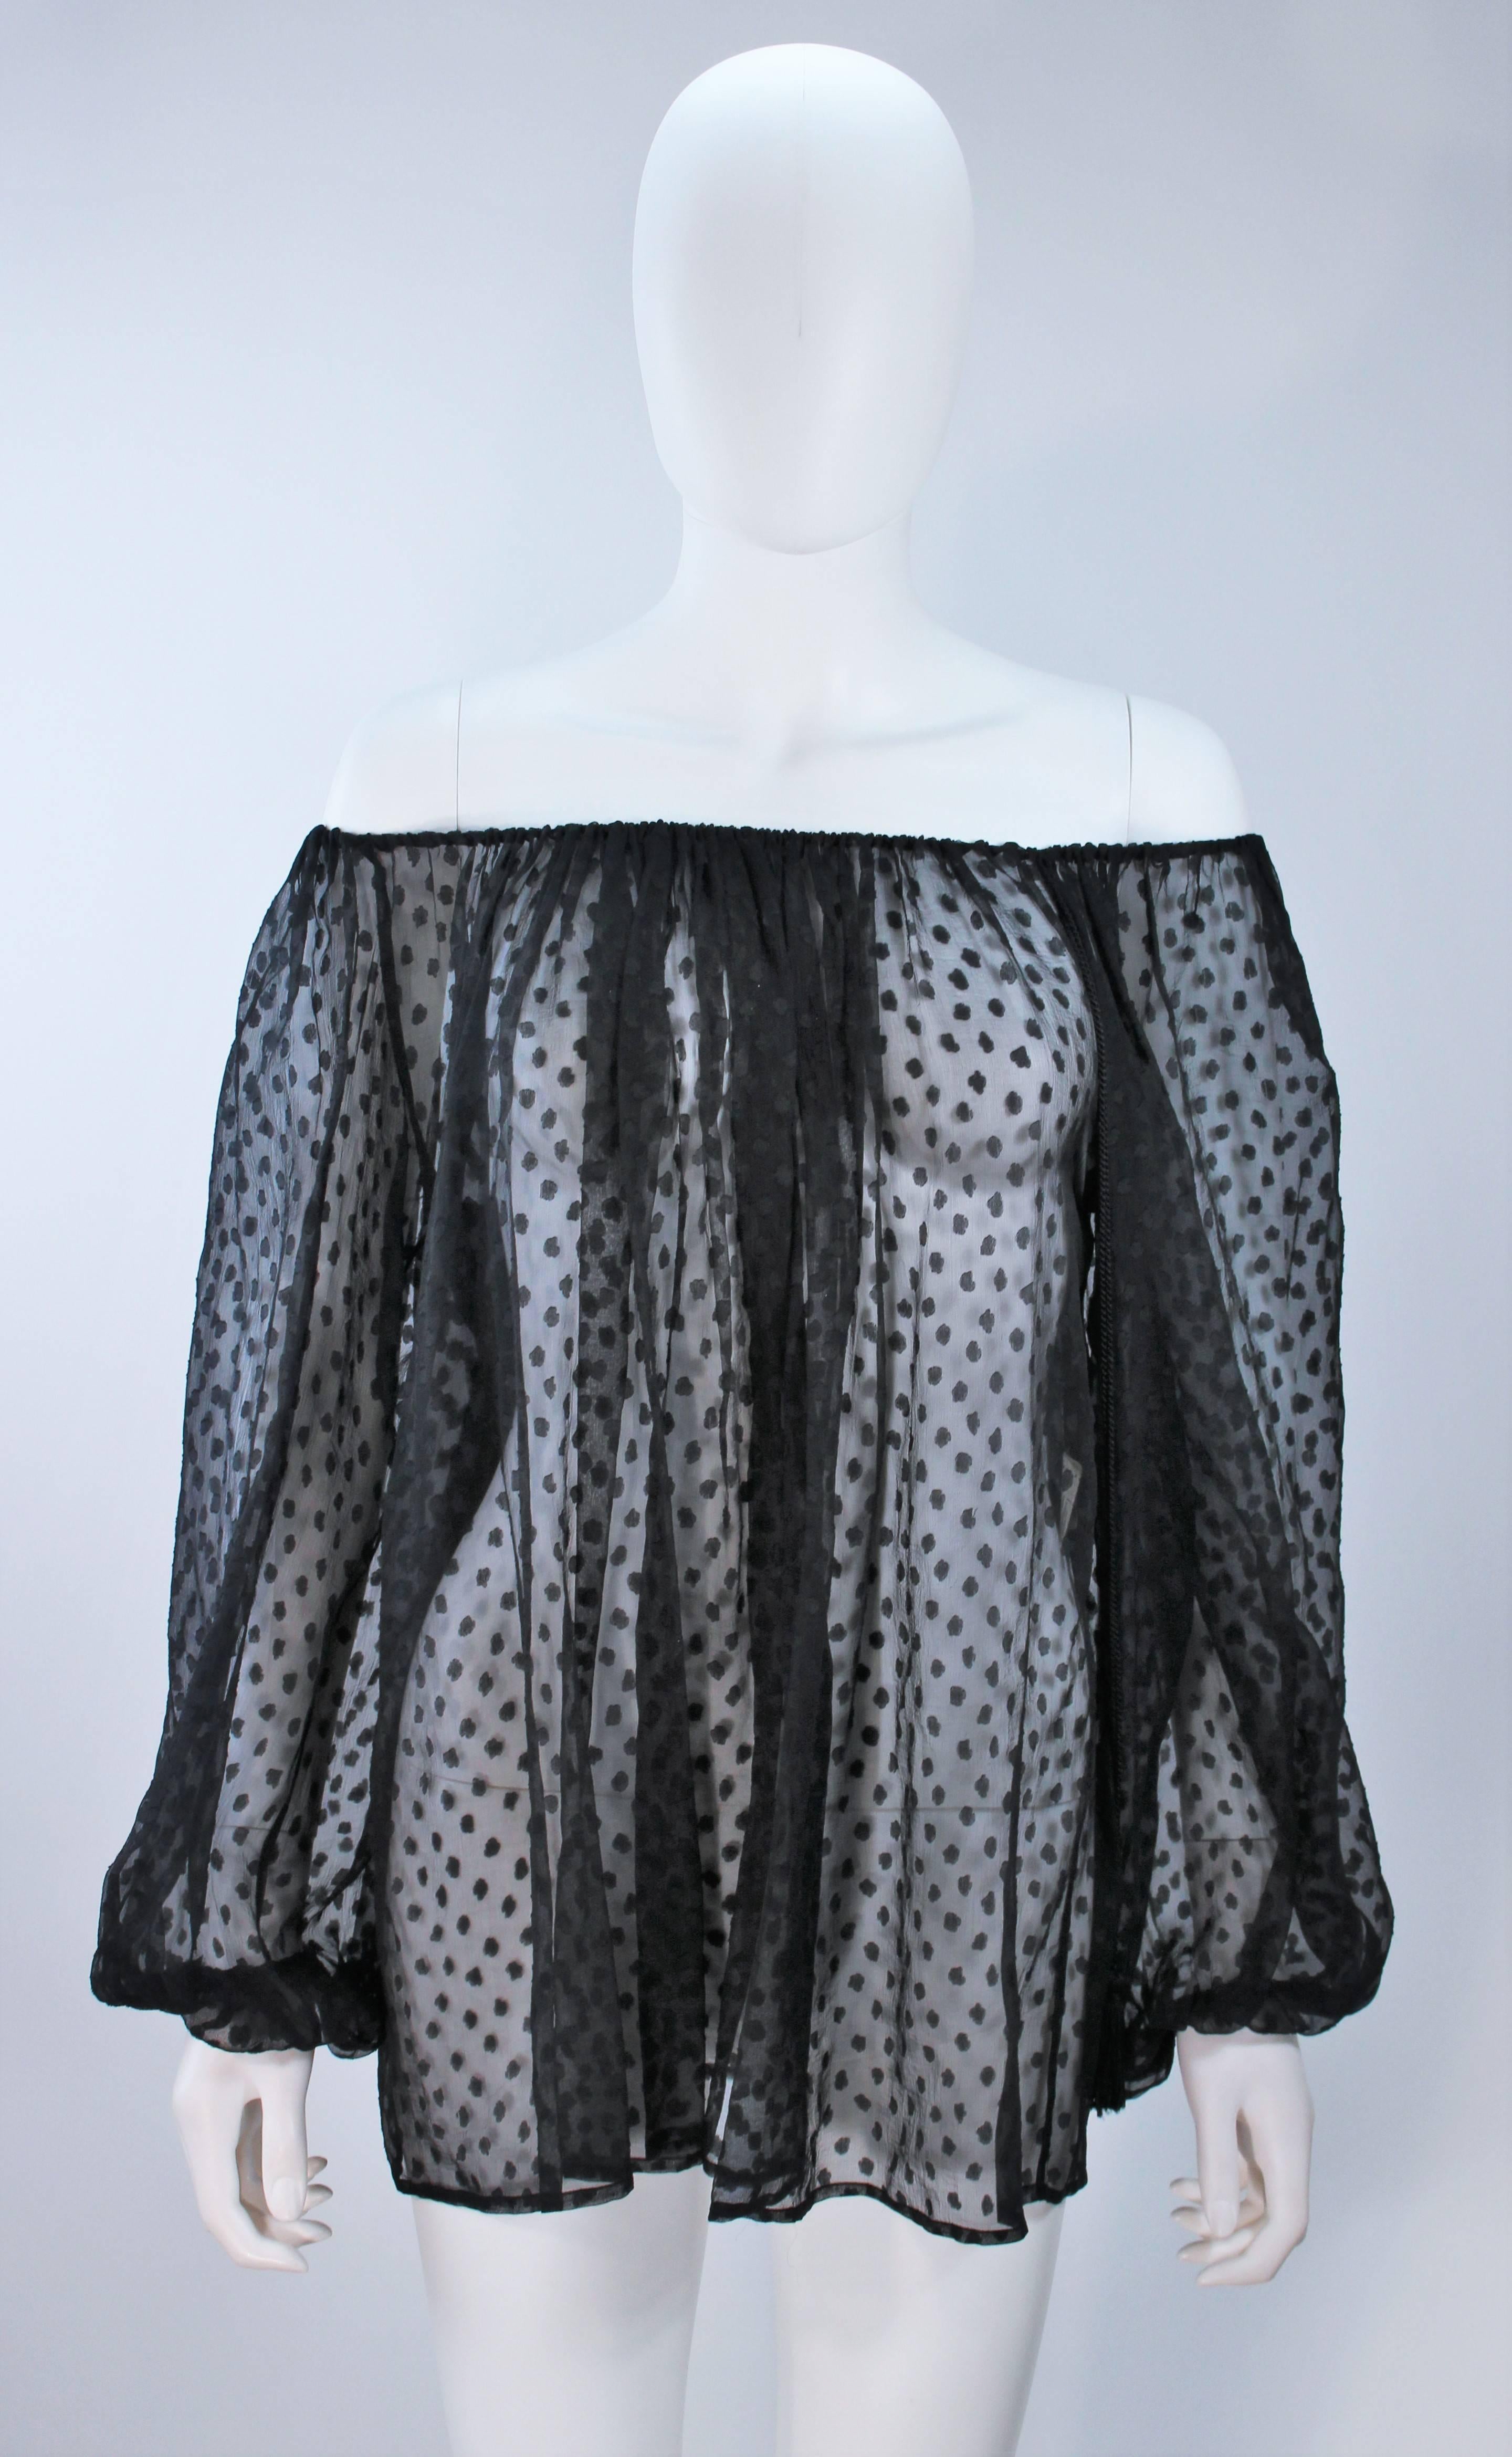  This Yves Saint Laurent blouse is composed of a sheer black polka dot silk. Features a stretch neckline and sleeves. Pull over style with tassel detail. In excellent vintage condition. 

 **Please cross-reference measurements for personal